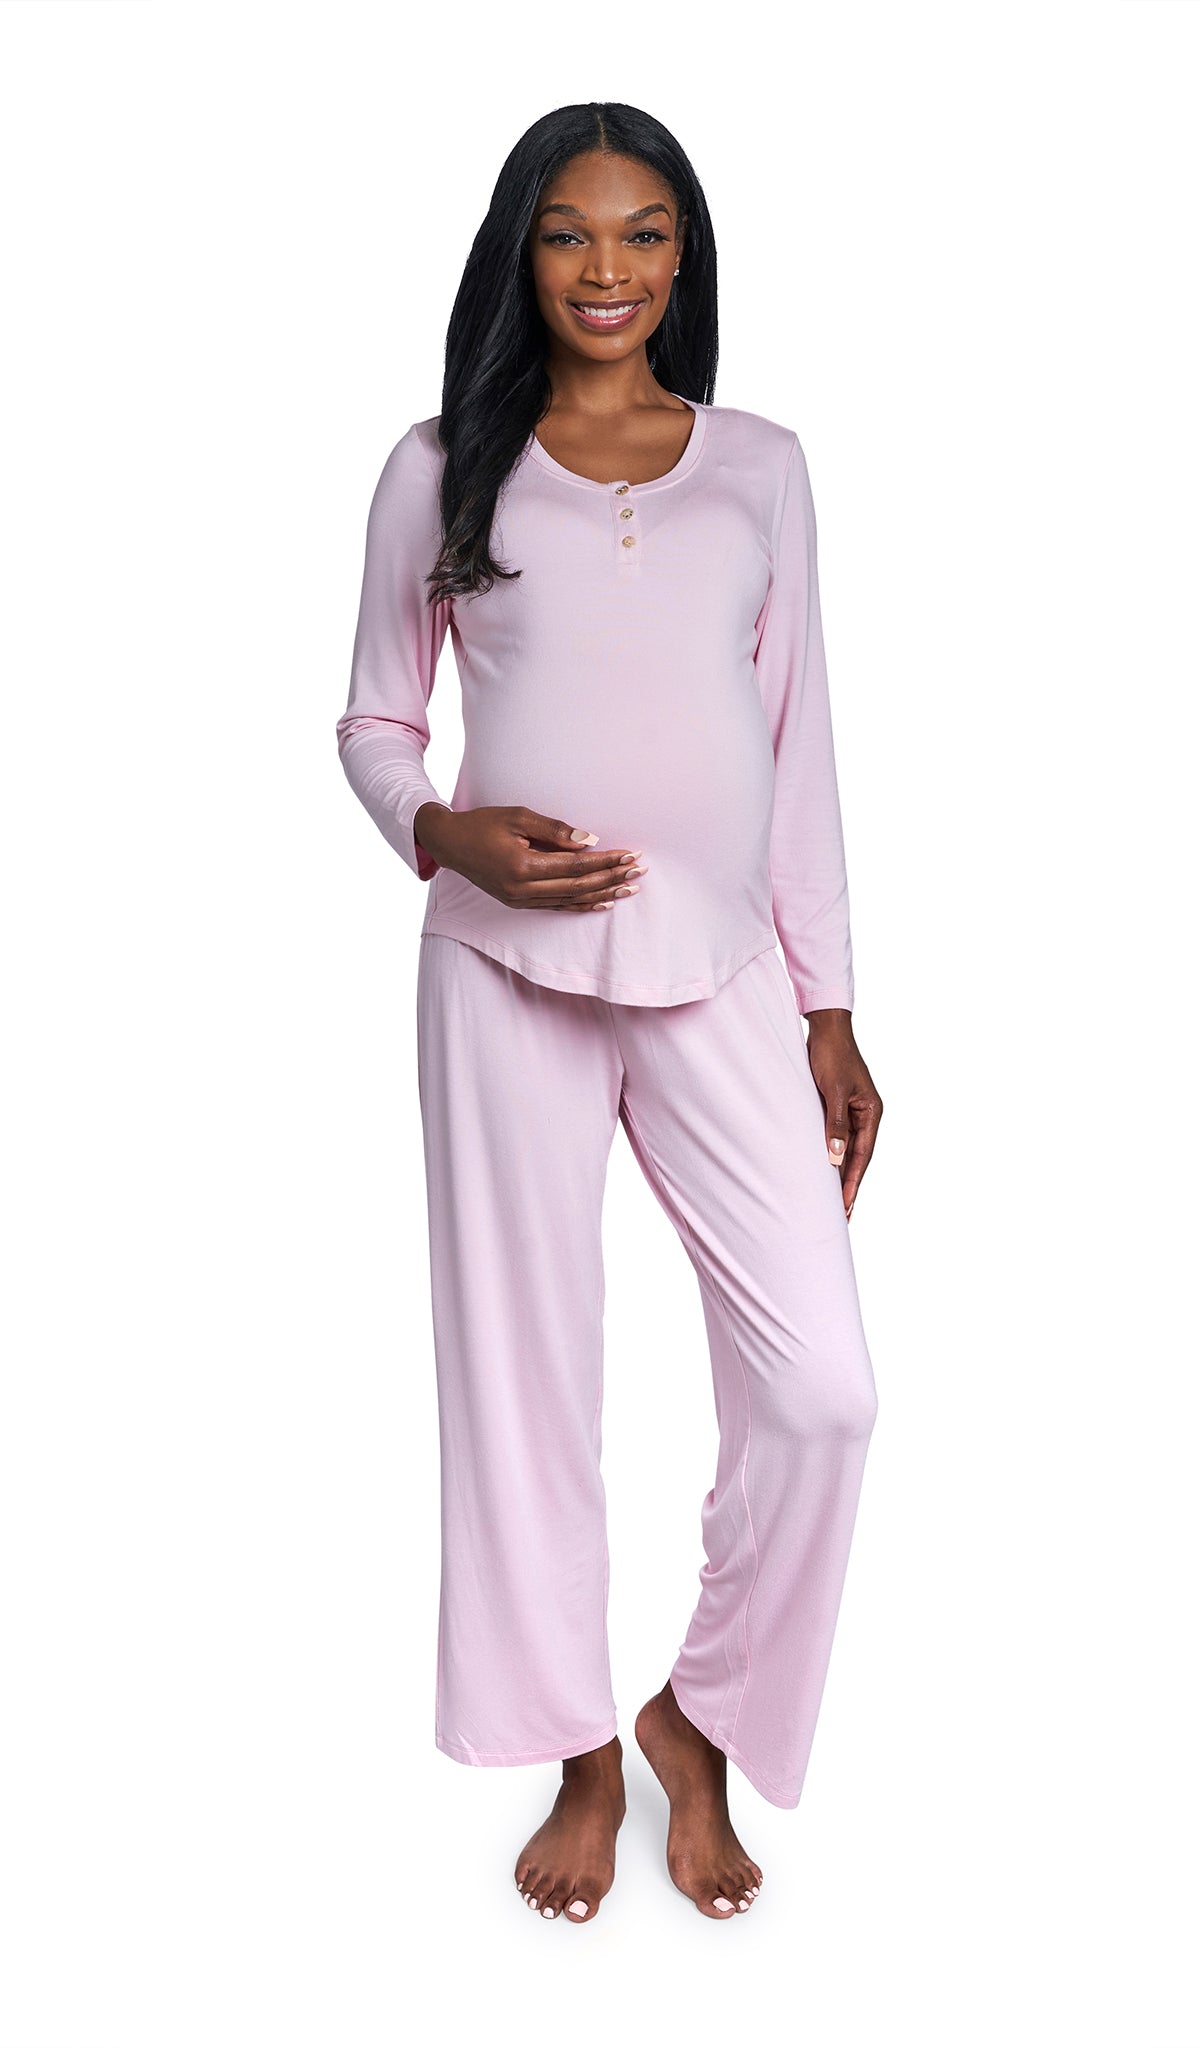 Blush Laina 2-Piece Set. Pregnant woman wearing button front placket long sleeve top and pant with one hand on belly.